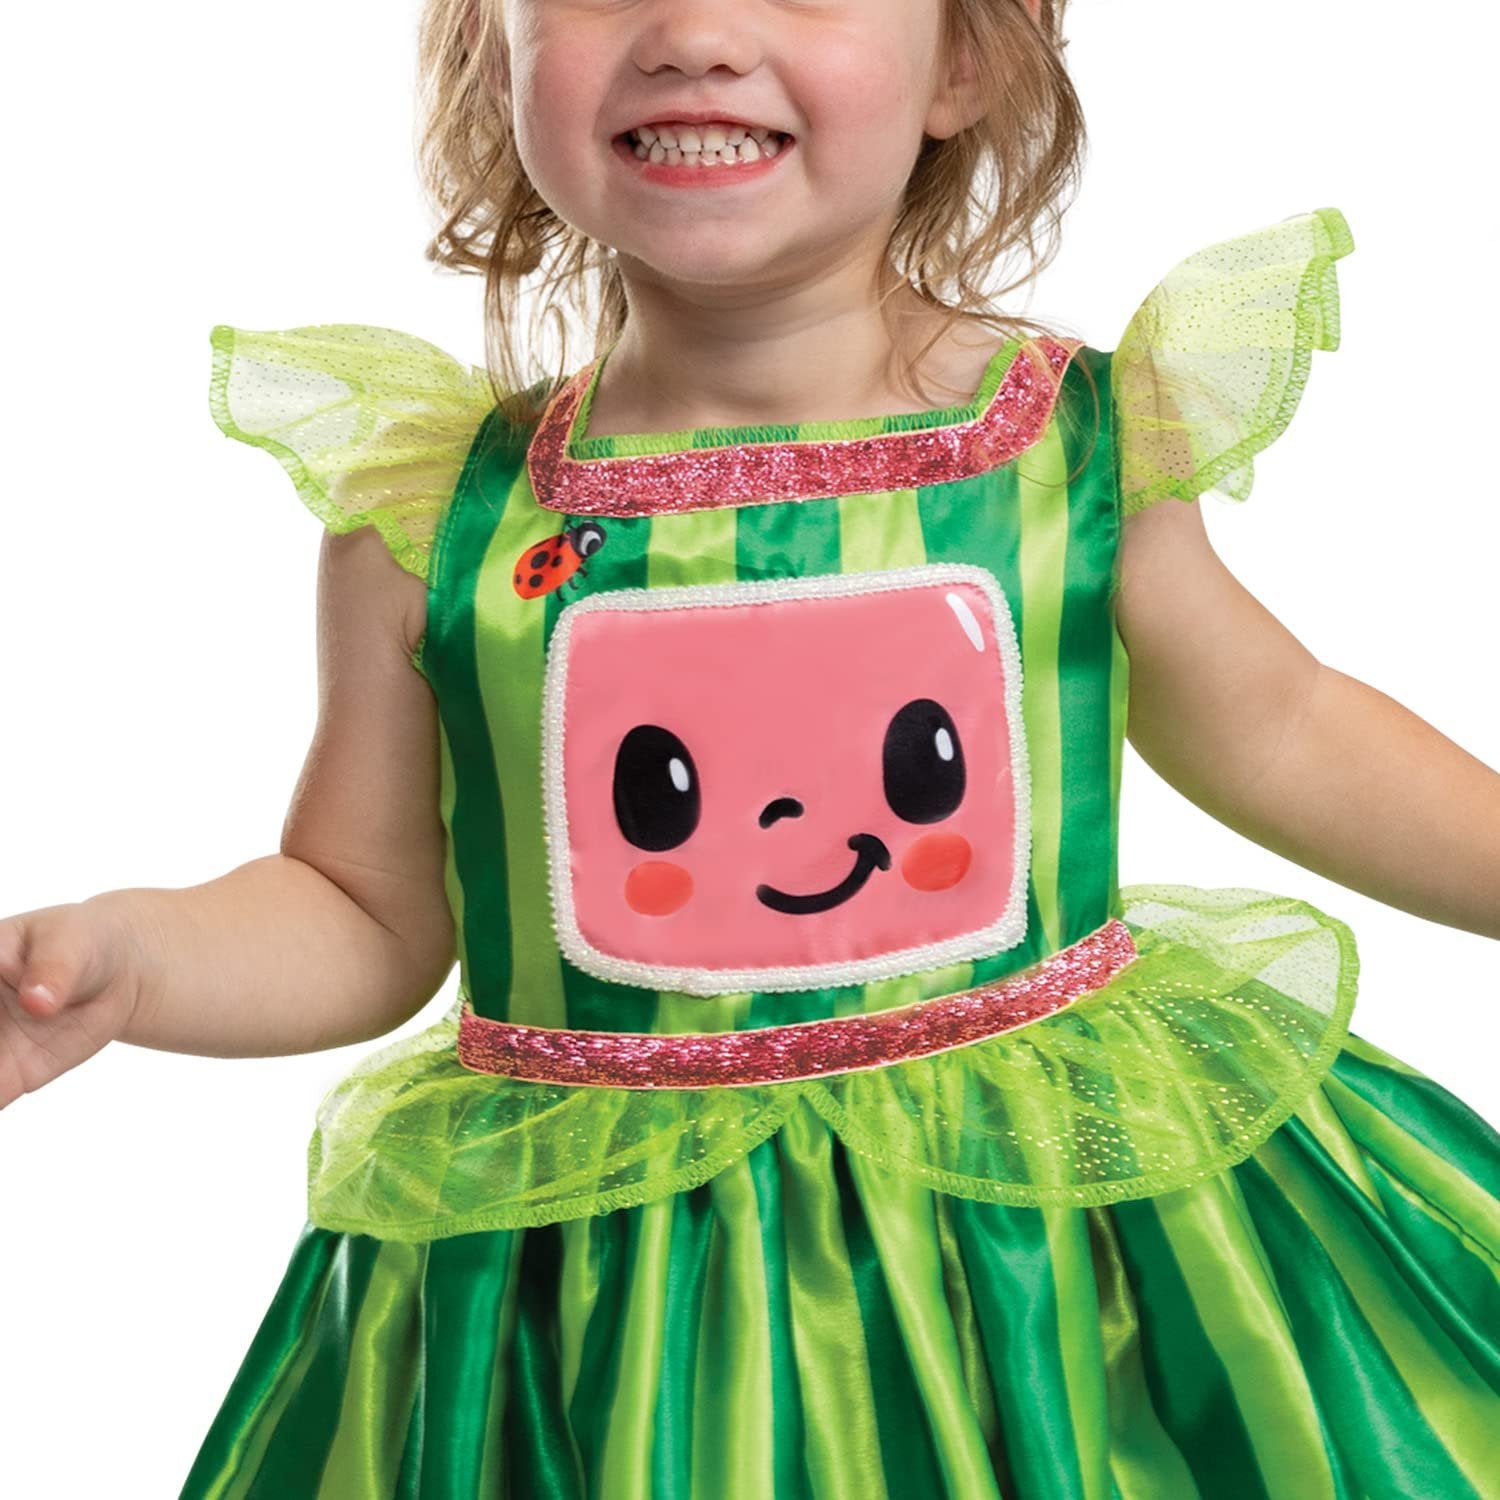 Disguise Cocomelon Toddler Dress, Official Cocomelon Costume Tutu Outfit for Kids, Toddler Size (3T-4T)